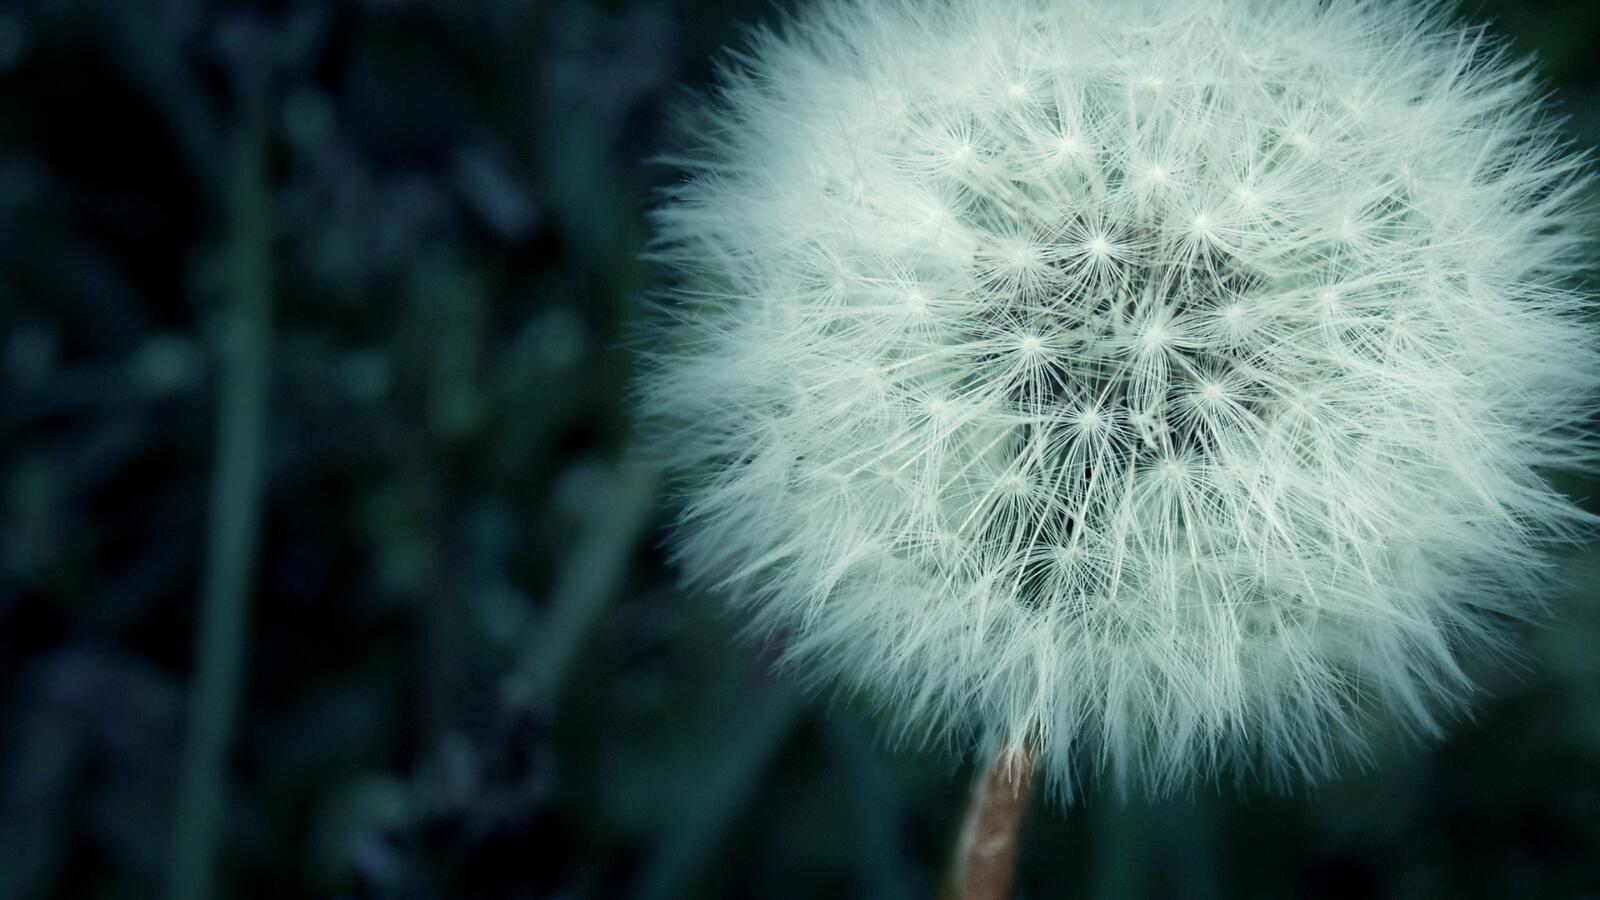 Free photo An image of a fluffy dandelion